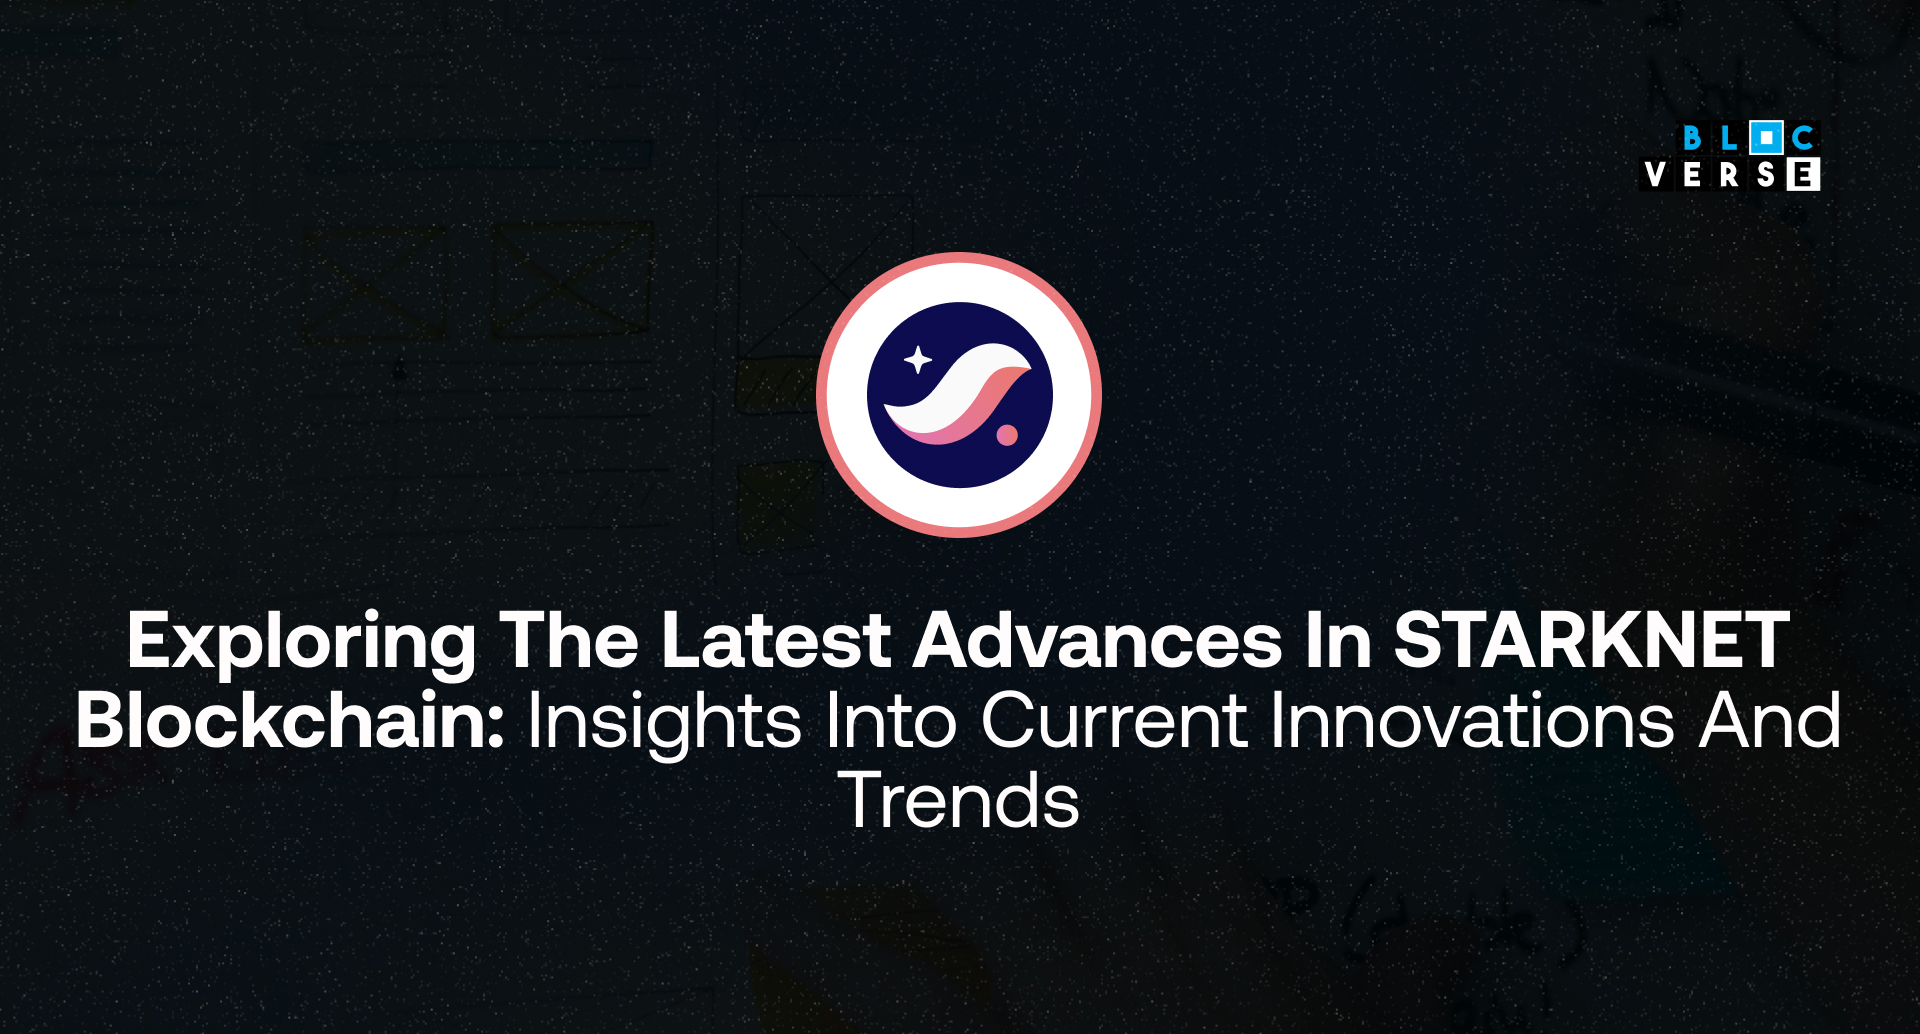 EXPLORING THE LATEST ADVANCES IN STARKNET BLOCKCHAIN: INSIGHTS INTO CURRENT INNOVATIONS AND TRENDS